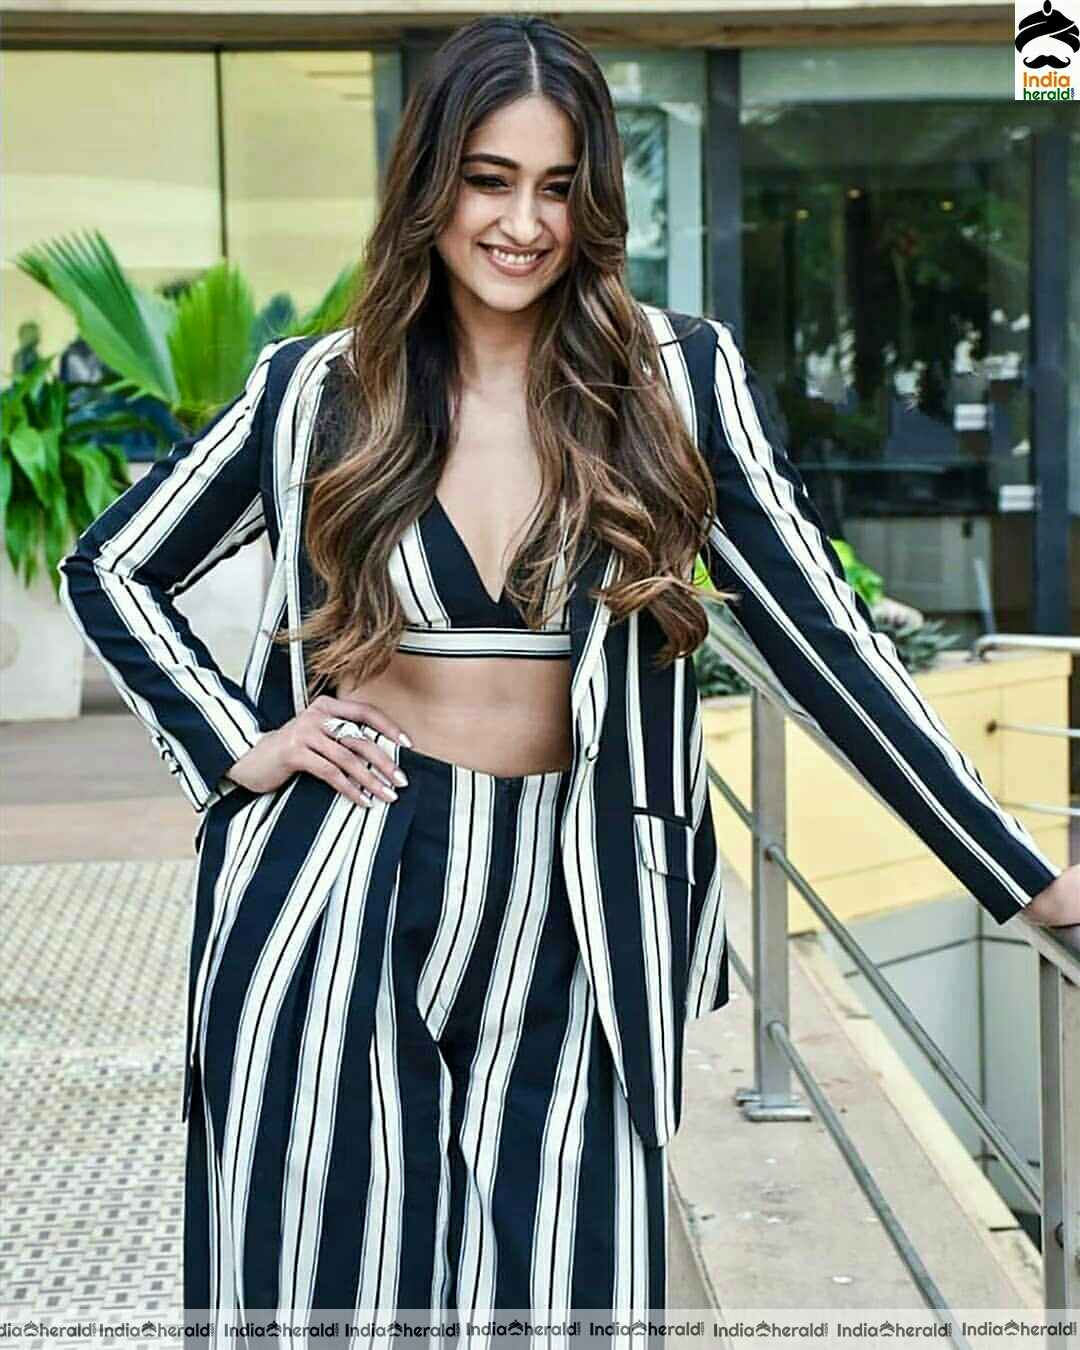 Ileana Hot in Deep Cleavage And Sexy Curves In Black And White Dress